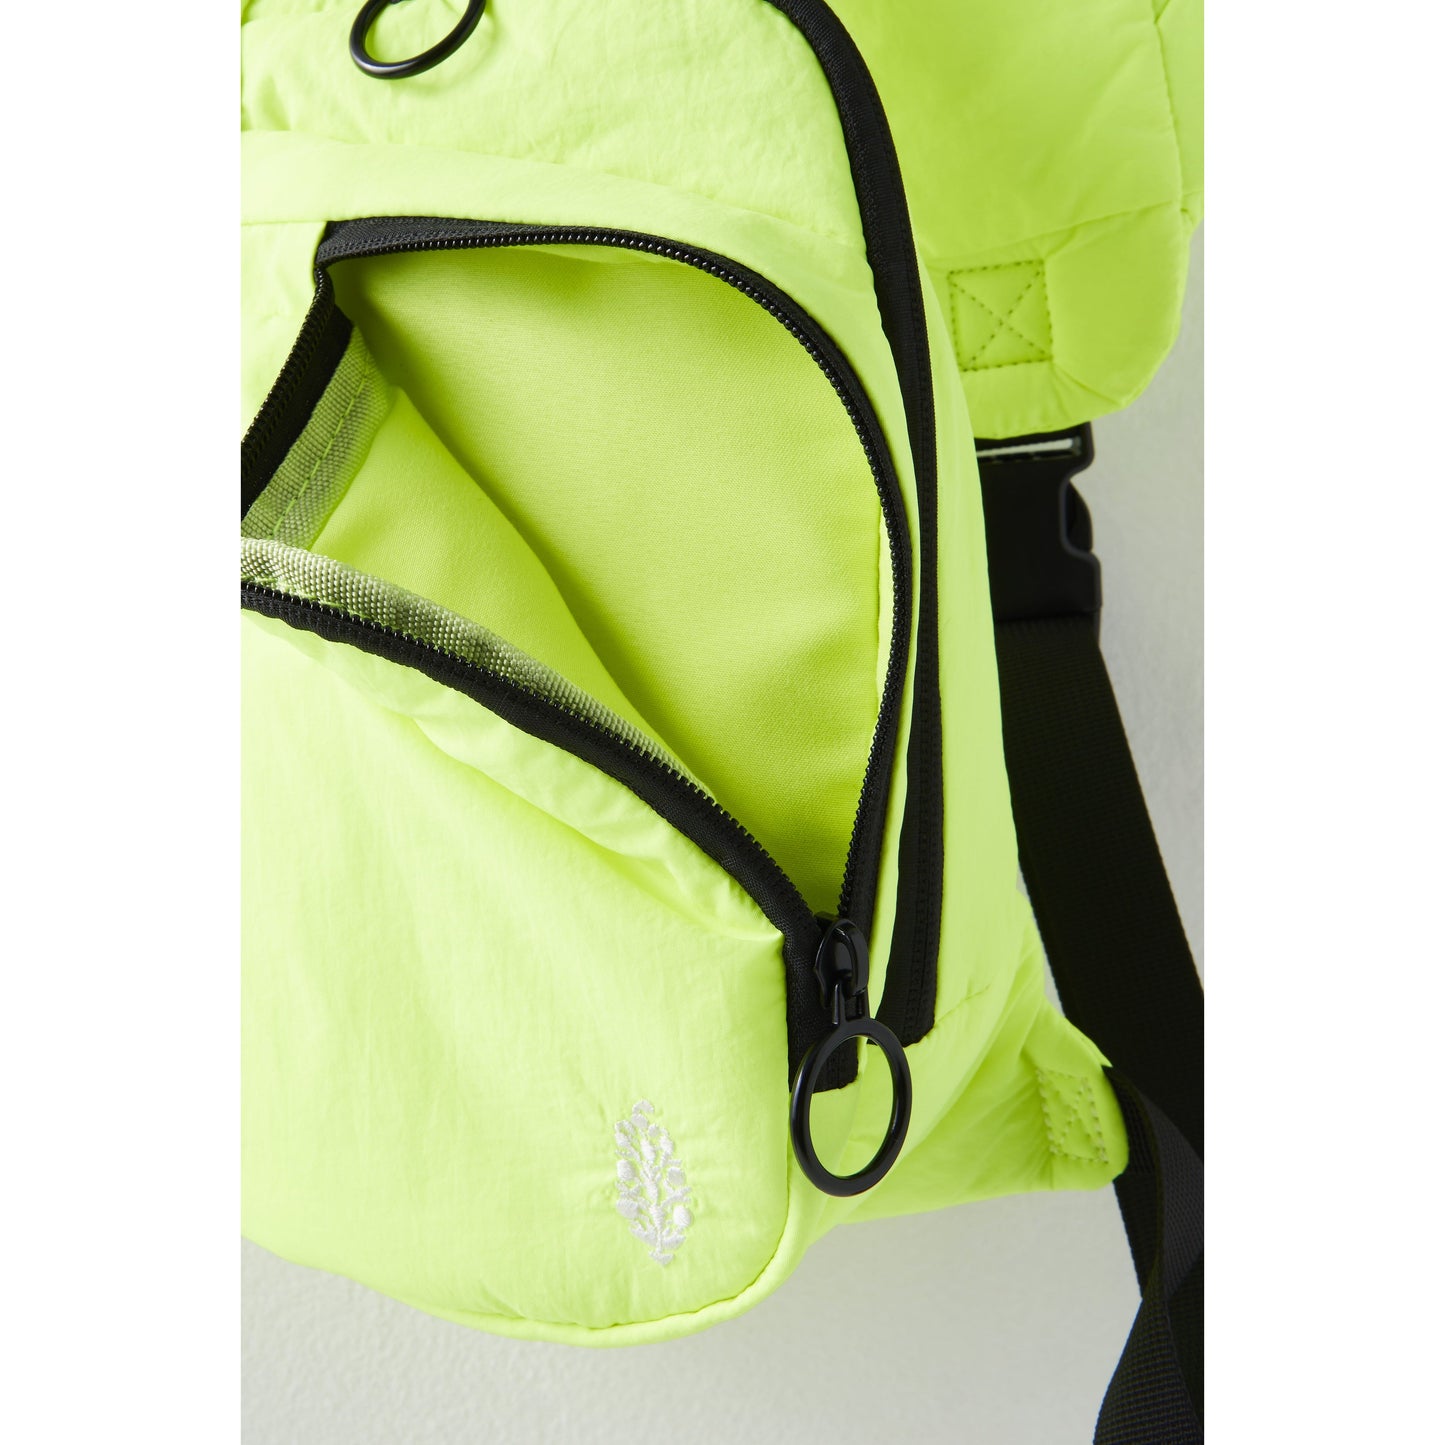 Bright neon green Renegade Sling bag with an open zipper revealing the interior, featuring a detailed Free People Movement logo and black trimming.